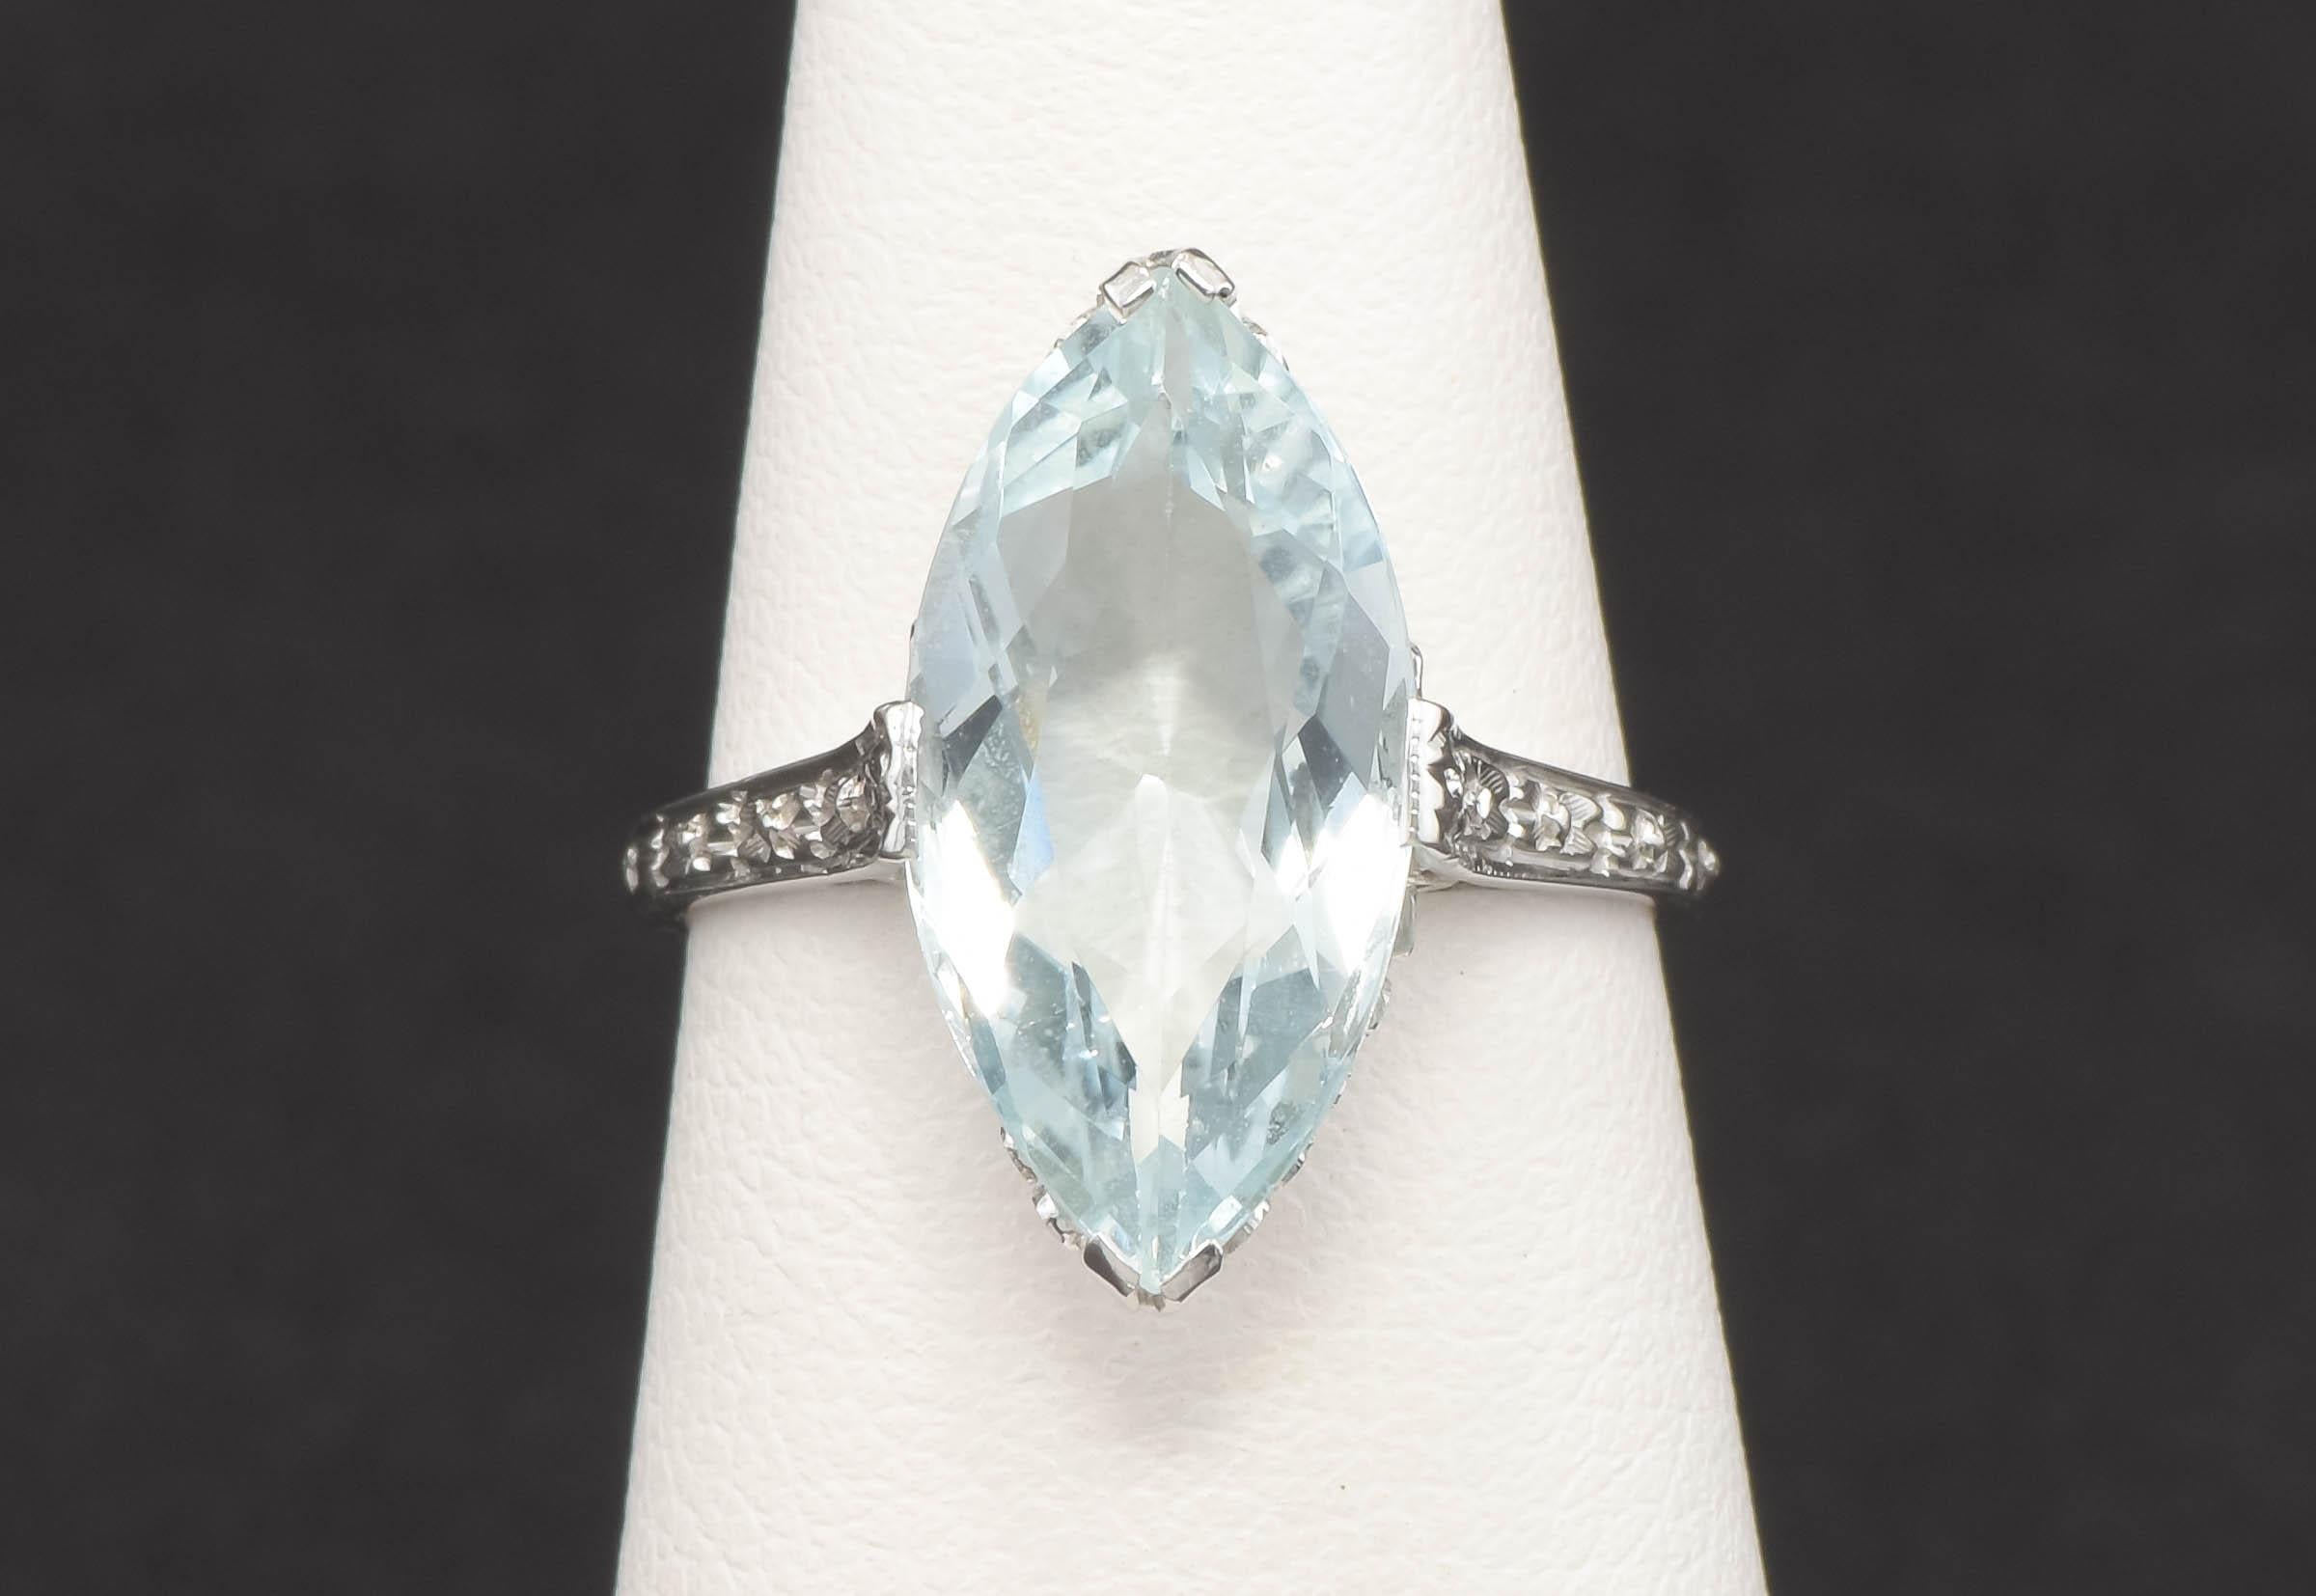 Elegant flower blossoms and unusually pretty filigree. set off the lovely Aquamarine in this ring.  While Edwardian to Art Deco in style, I believe it was likely made later, from the 1940's to 1950's.

Crafted of 18K white gold, the ring features a